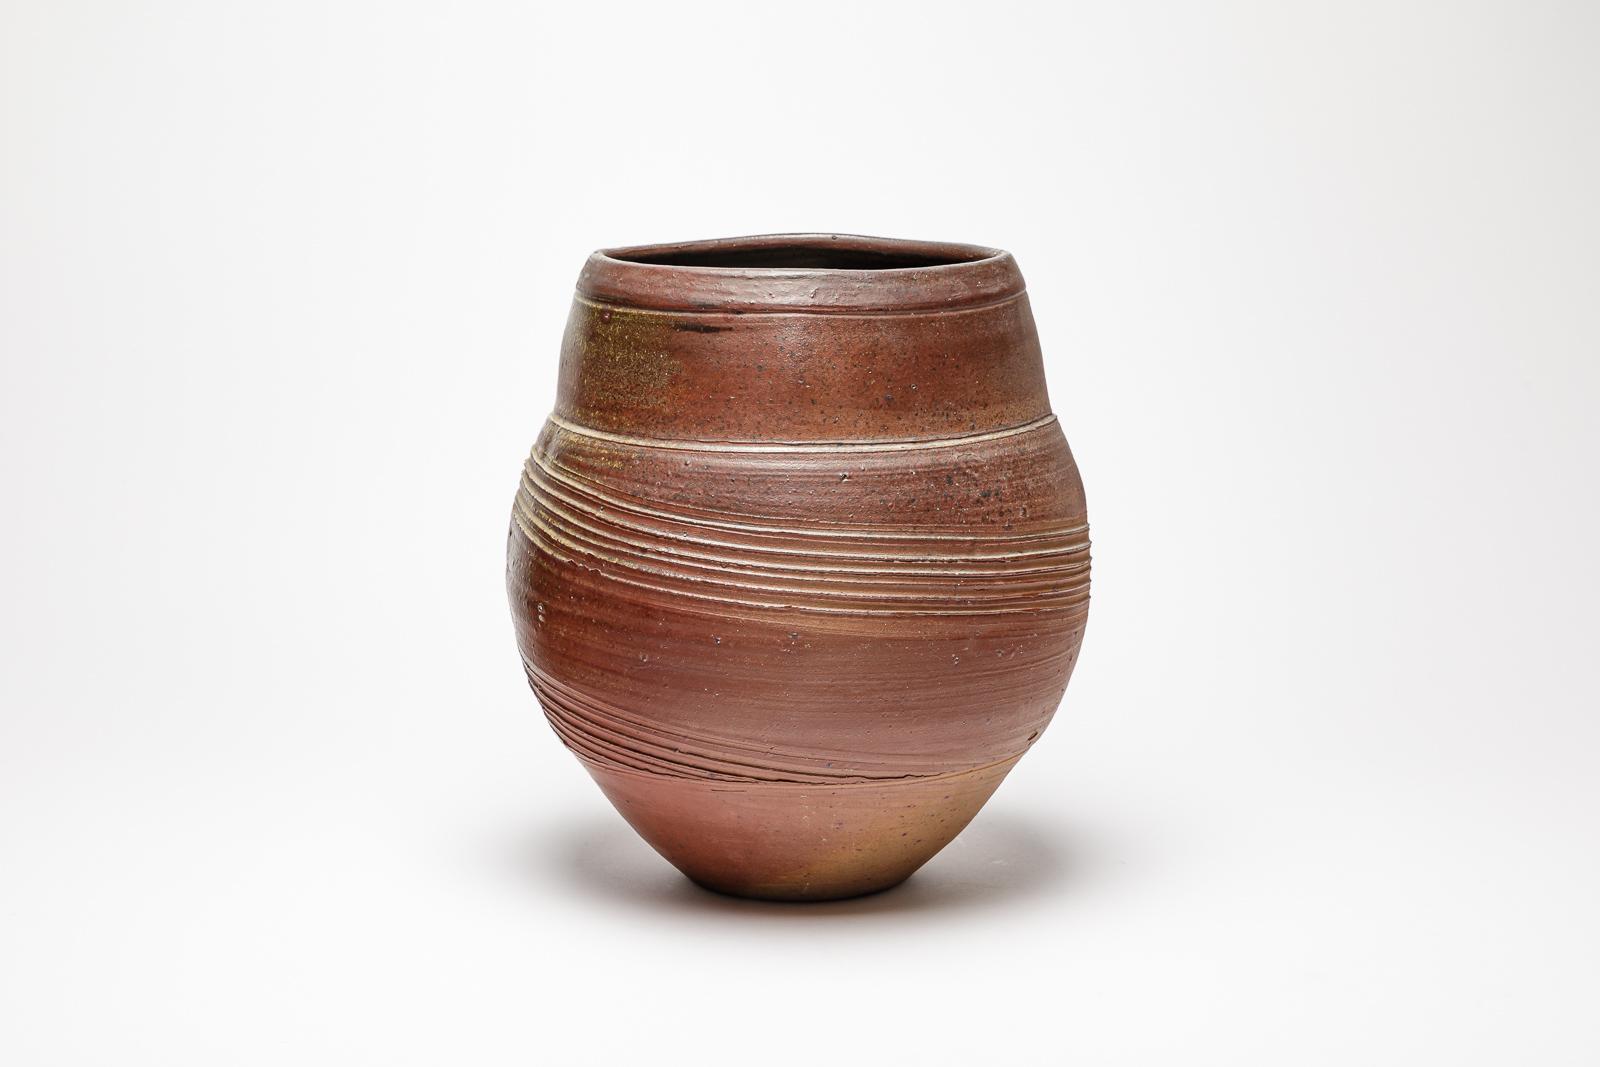 French Woodfired Ceramic Vase, Eric Astoul, 1986 For Sale